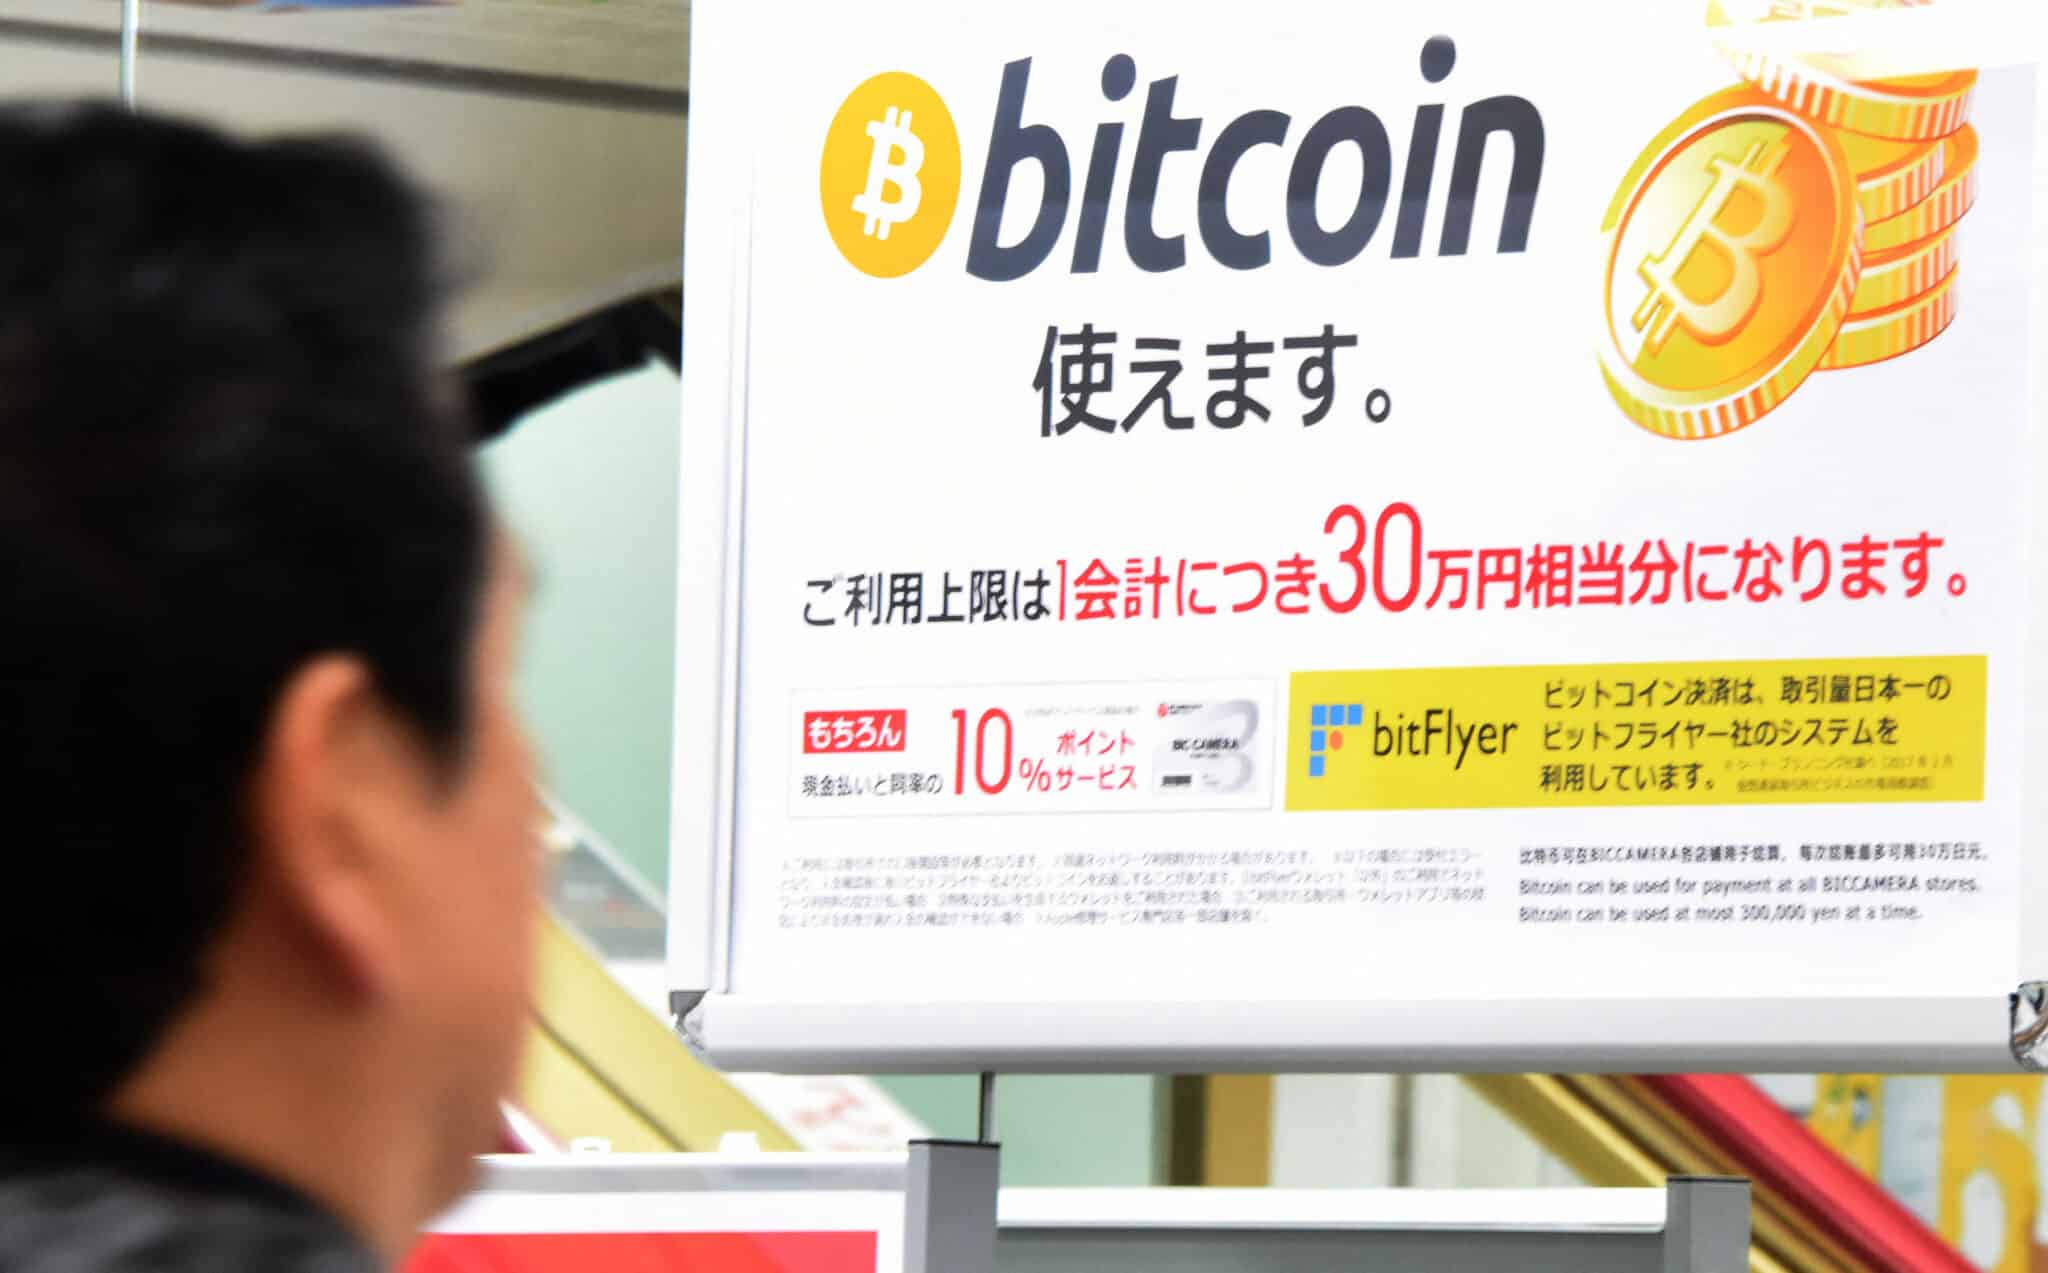 World’s largest pension fund explores bitcoin as an investment